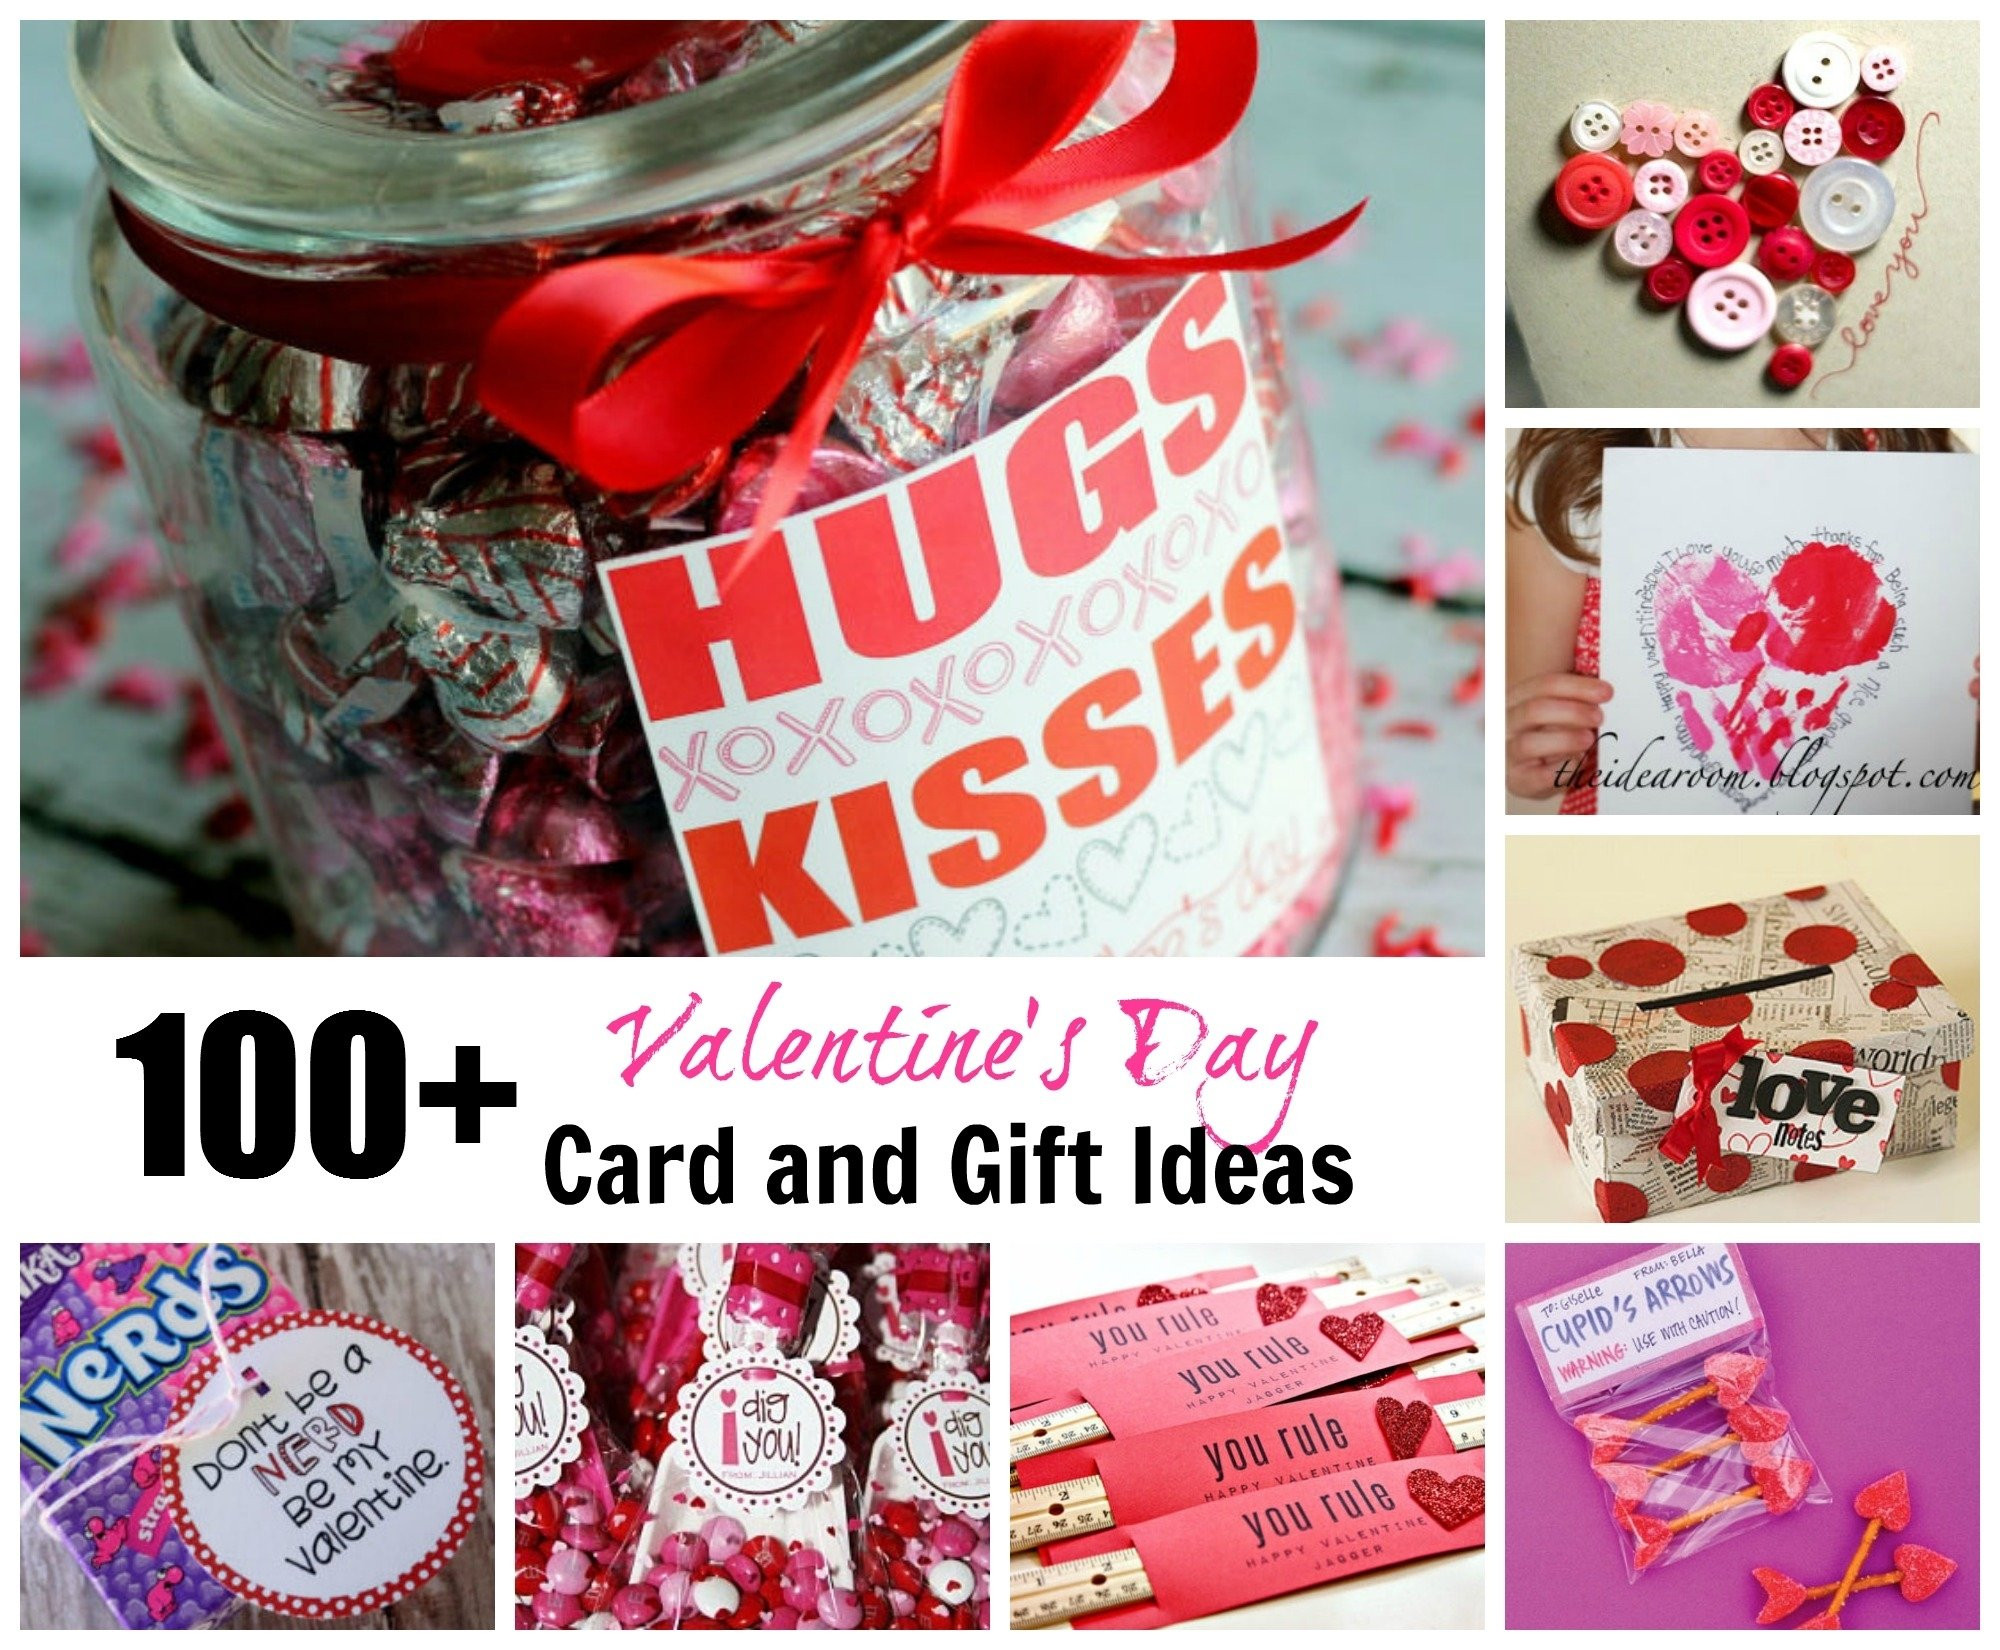 Homemade Valentines Gift Ideas For Him
 10 Lovable Homemade Valentines Ideas For Him 2020